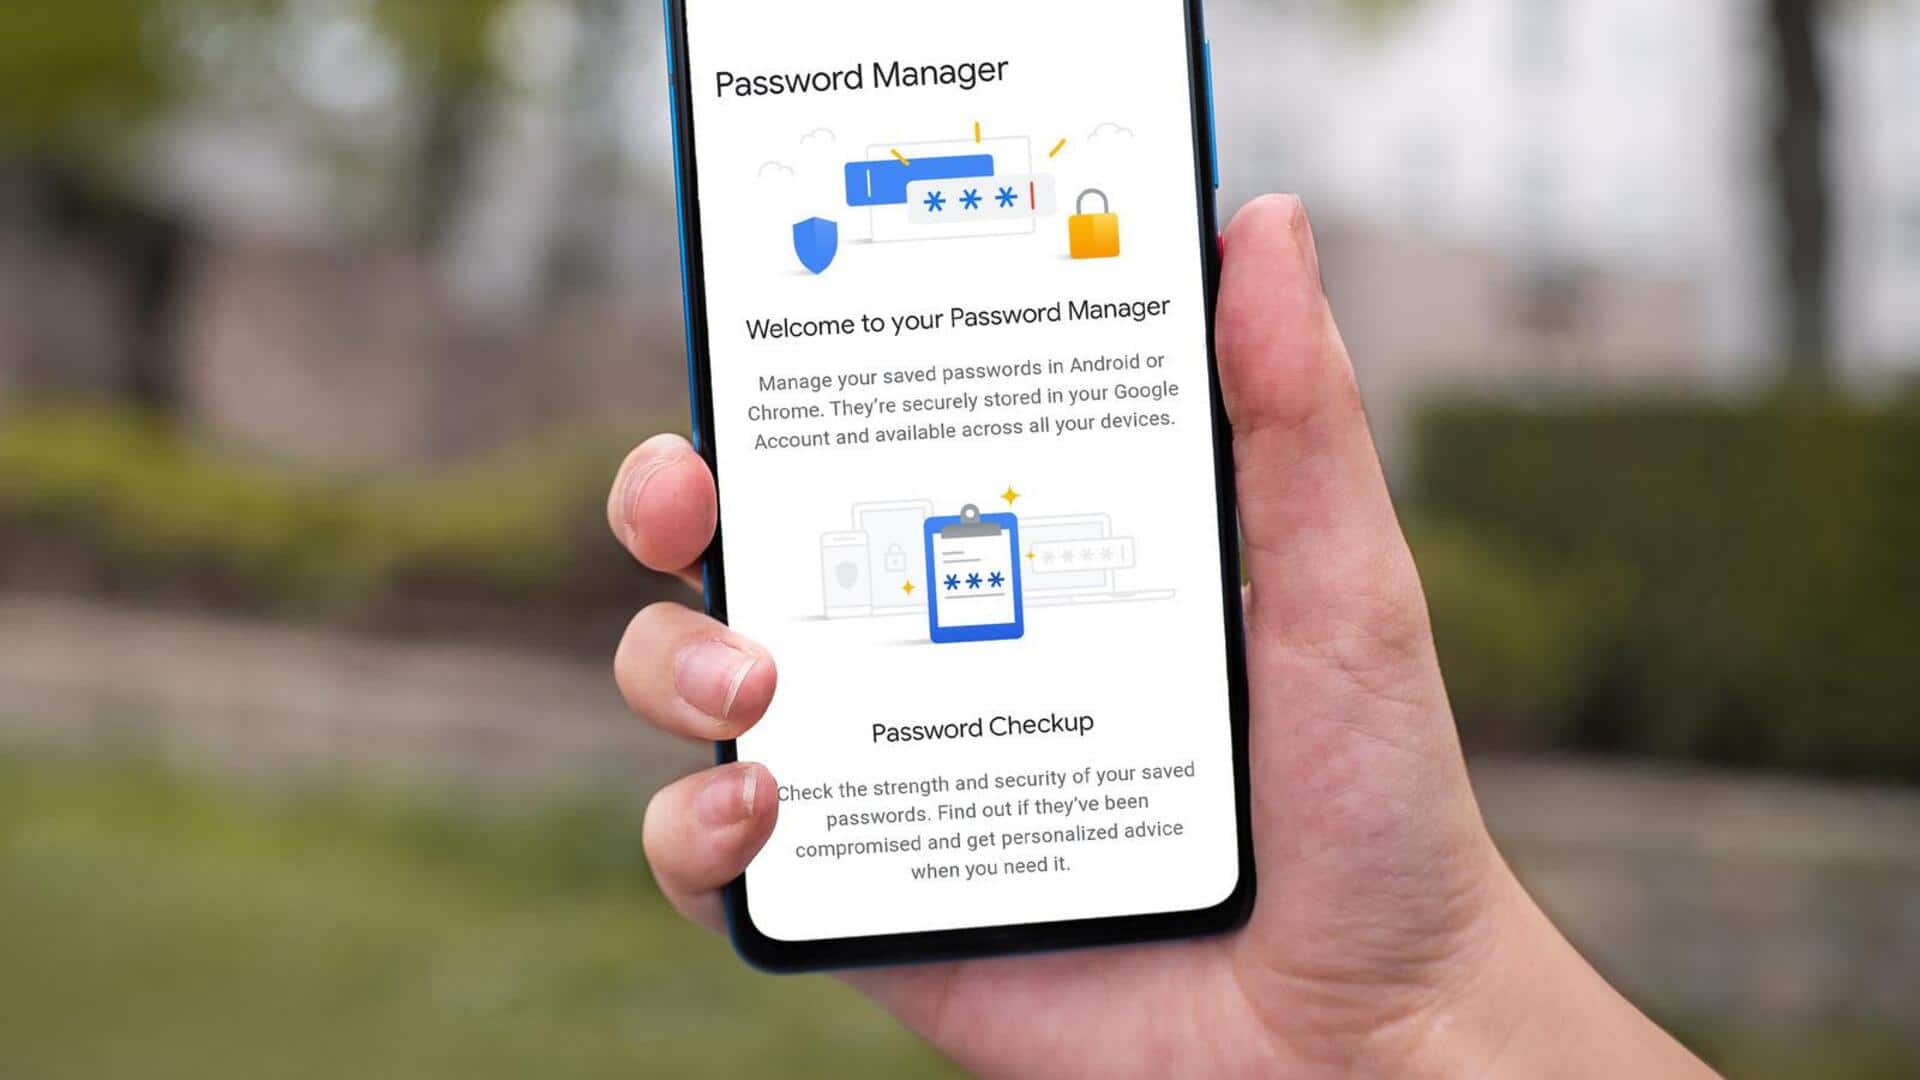 Google Password Manager to facilitate password sharing within family circles